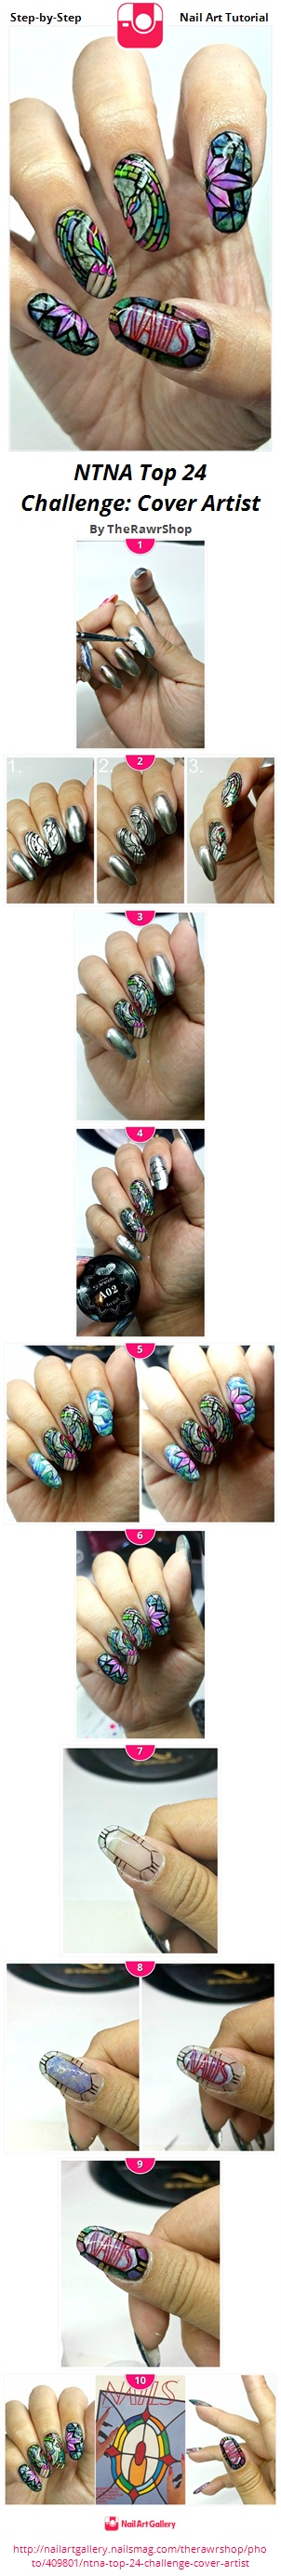 NTNA Top 24 Challenge: Cover Artist - Nail Art Gallery